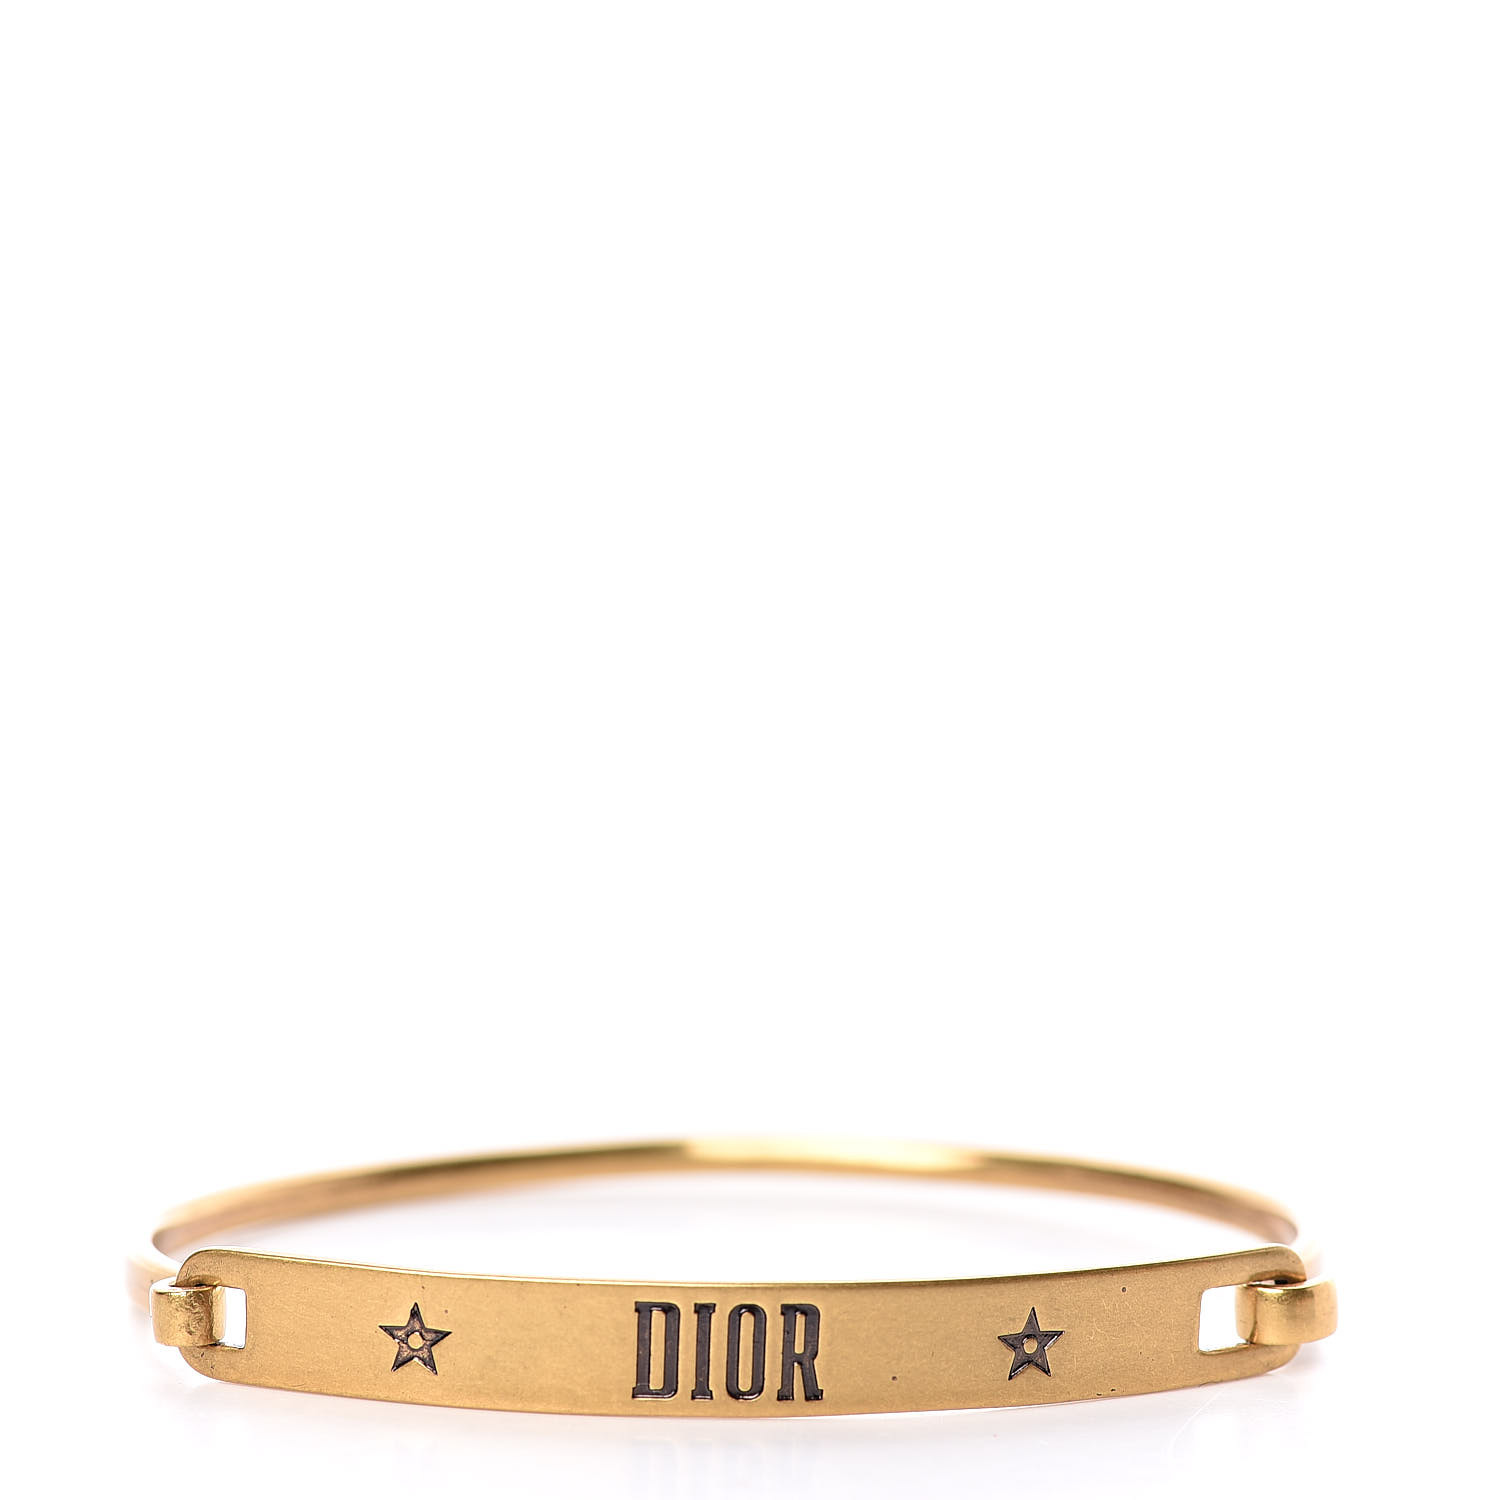 Dio(r)evolution Earrings Gold-Finish Metal | DIOR